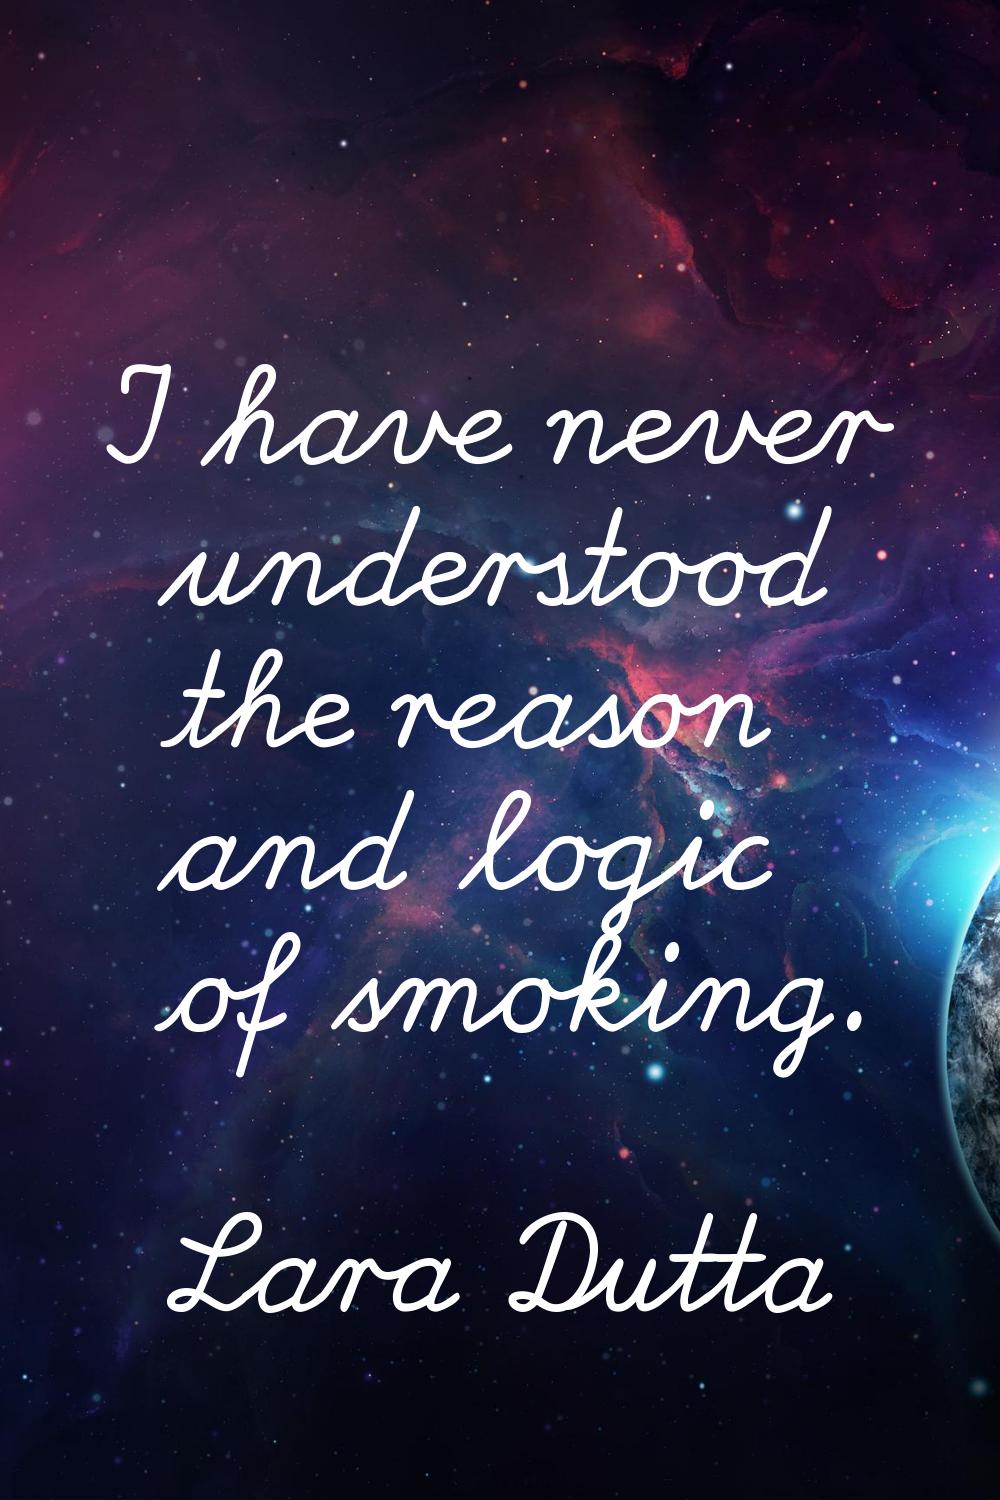 I have never understood the reason and logic of smoking.